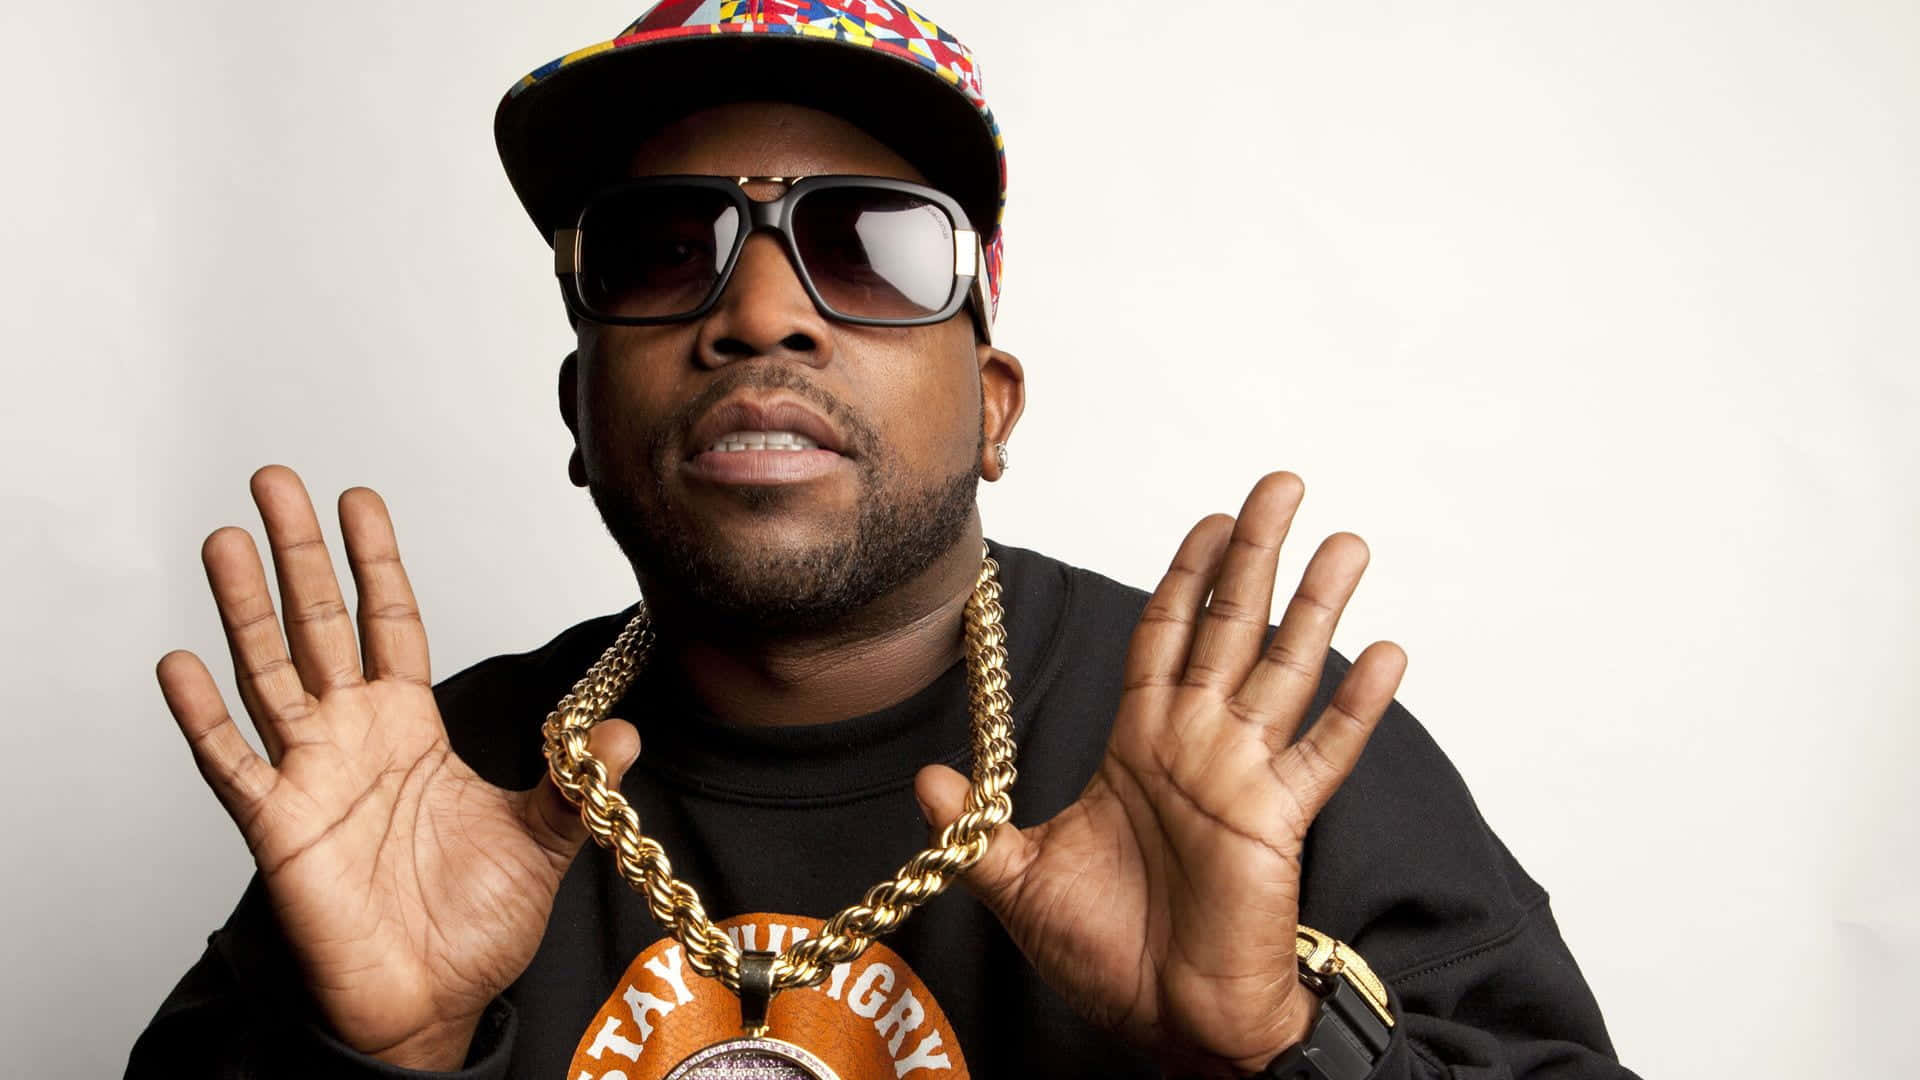 Killer Mike Rapper Posewith Gold Chain Wallpaper